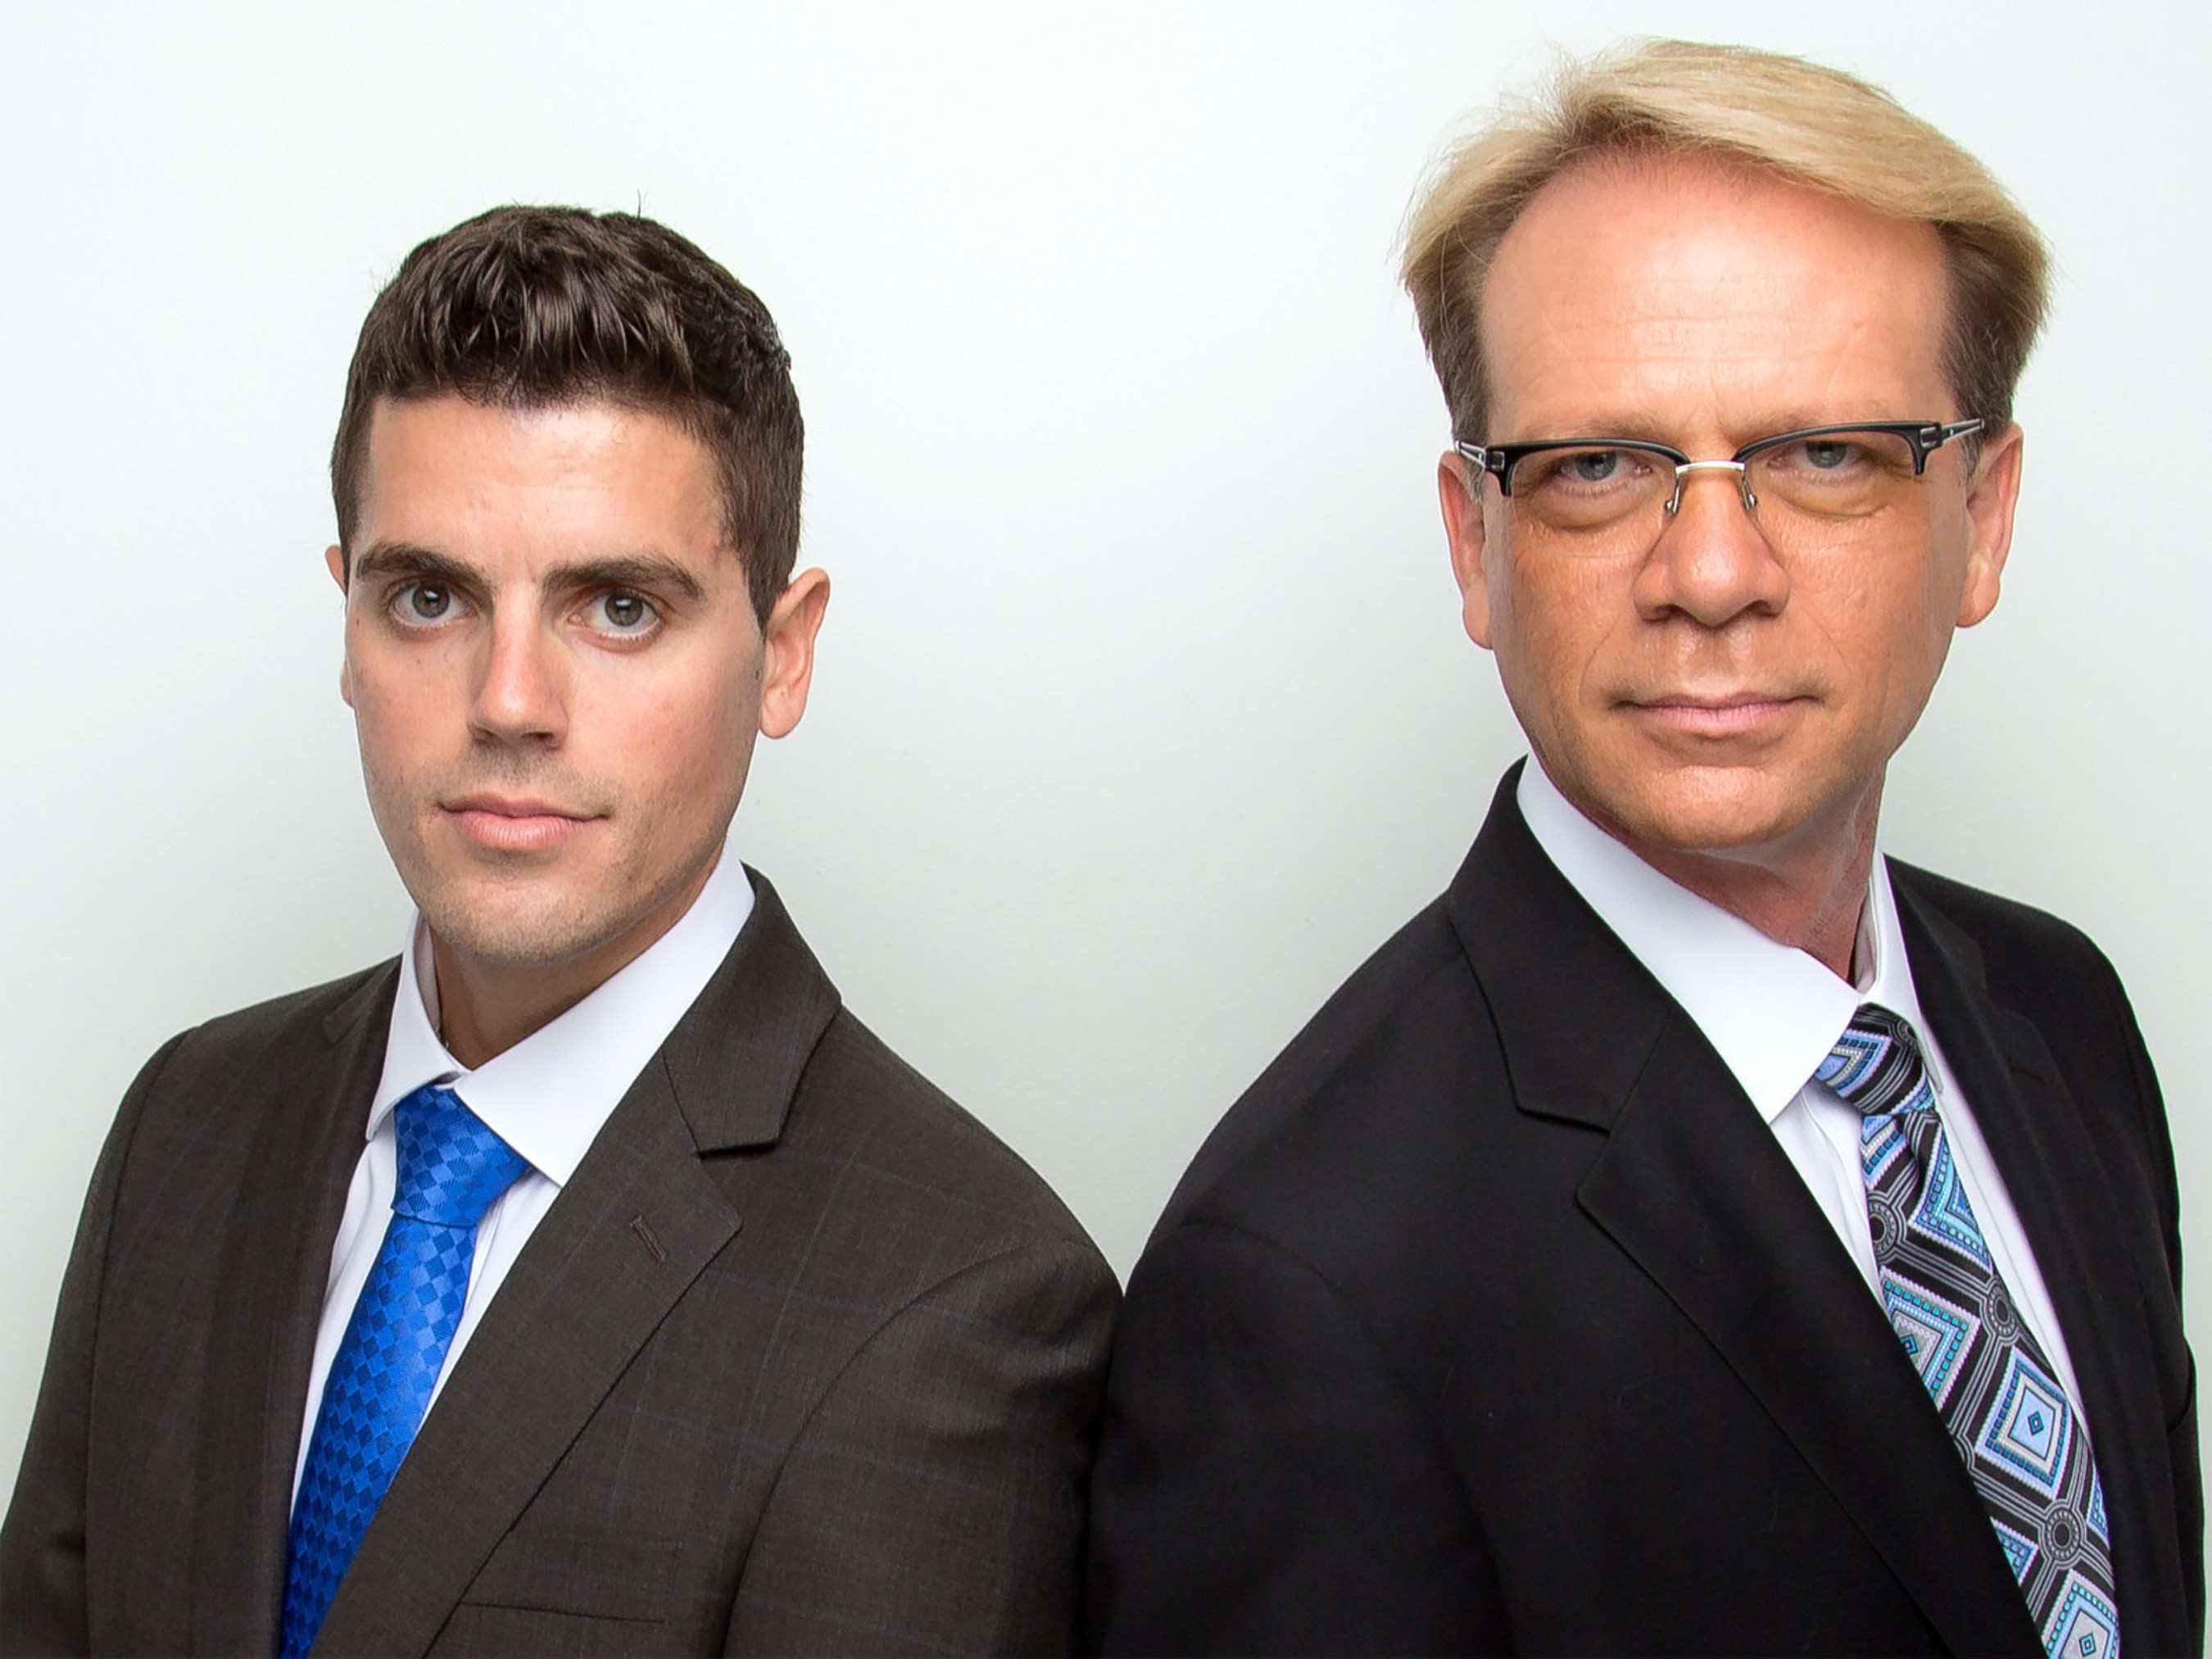 Brandon Perrier and Timothy Fussell, PhD of Partners South Insurance & Estate Planning: "Those who prepare and plan will face their financial future without fear."